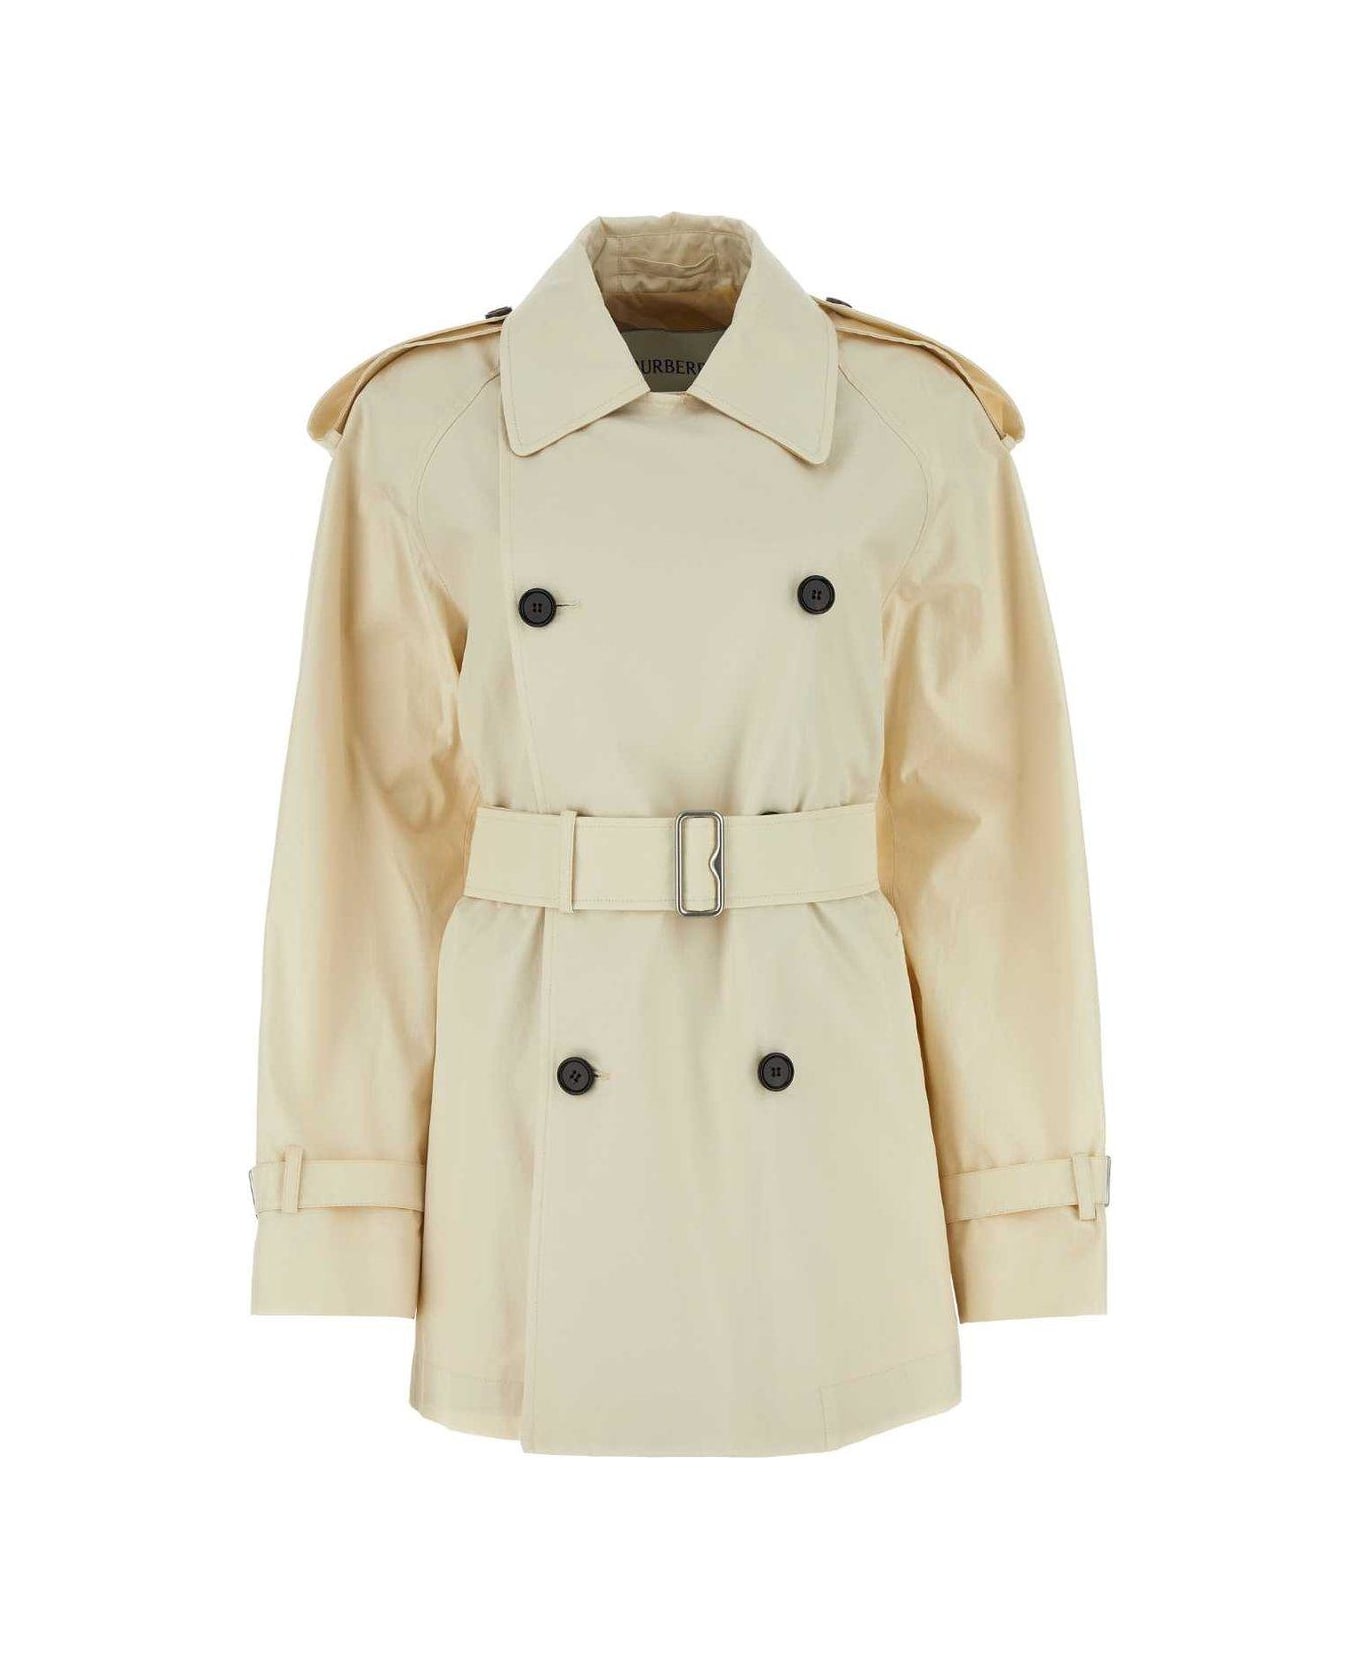 Burberry Double Breasted Belted Trench Coat - CALICO レインコート